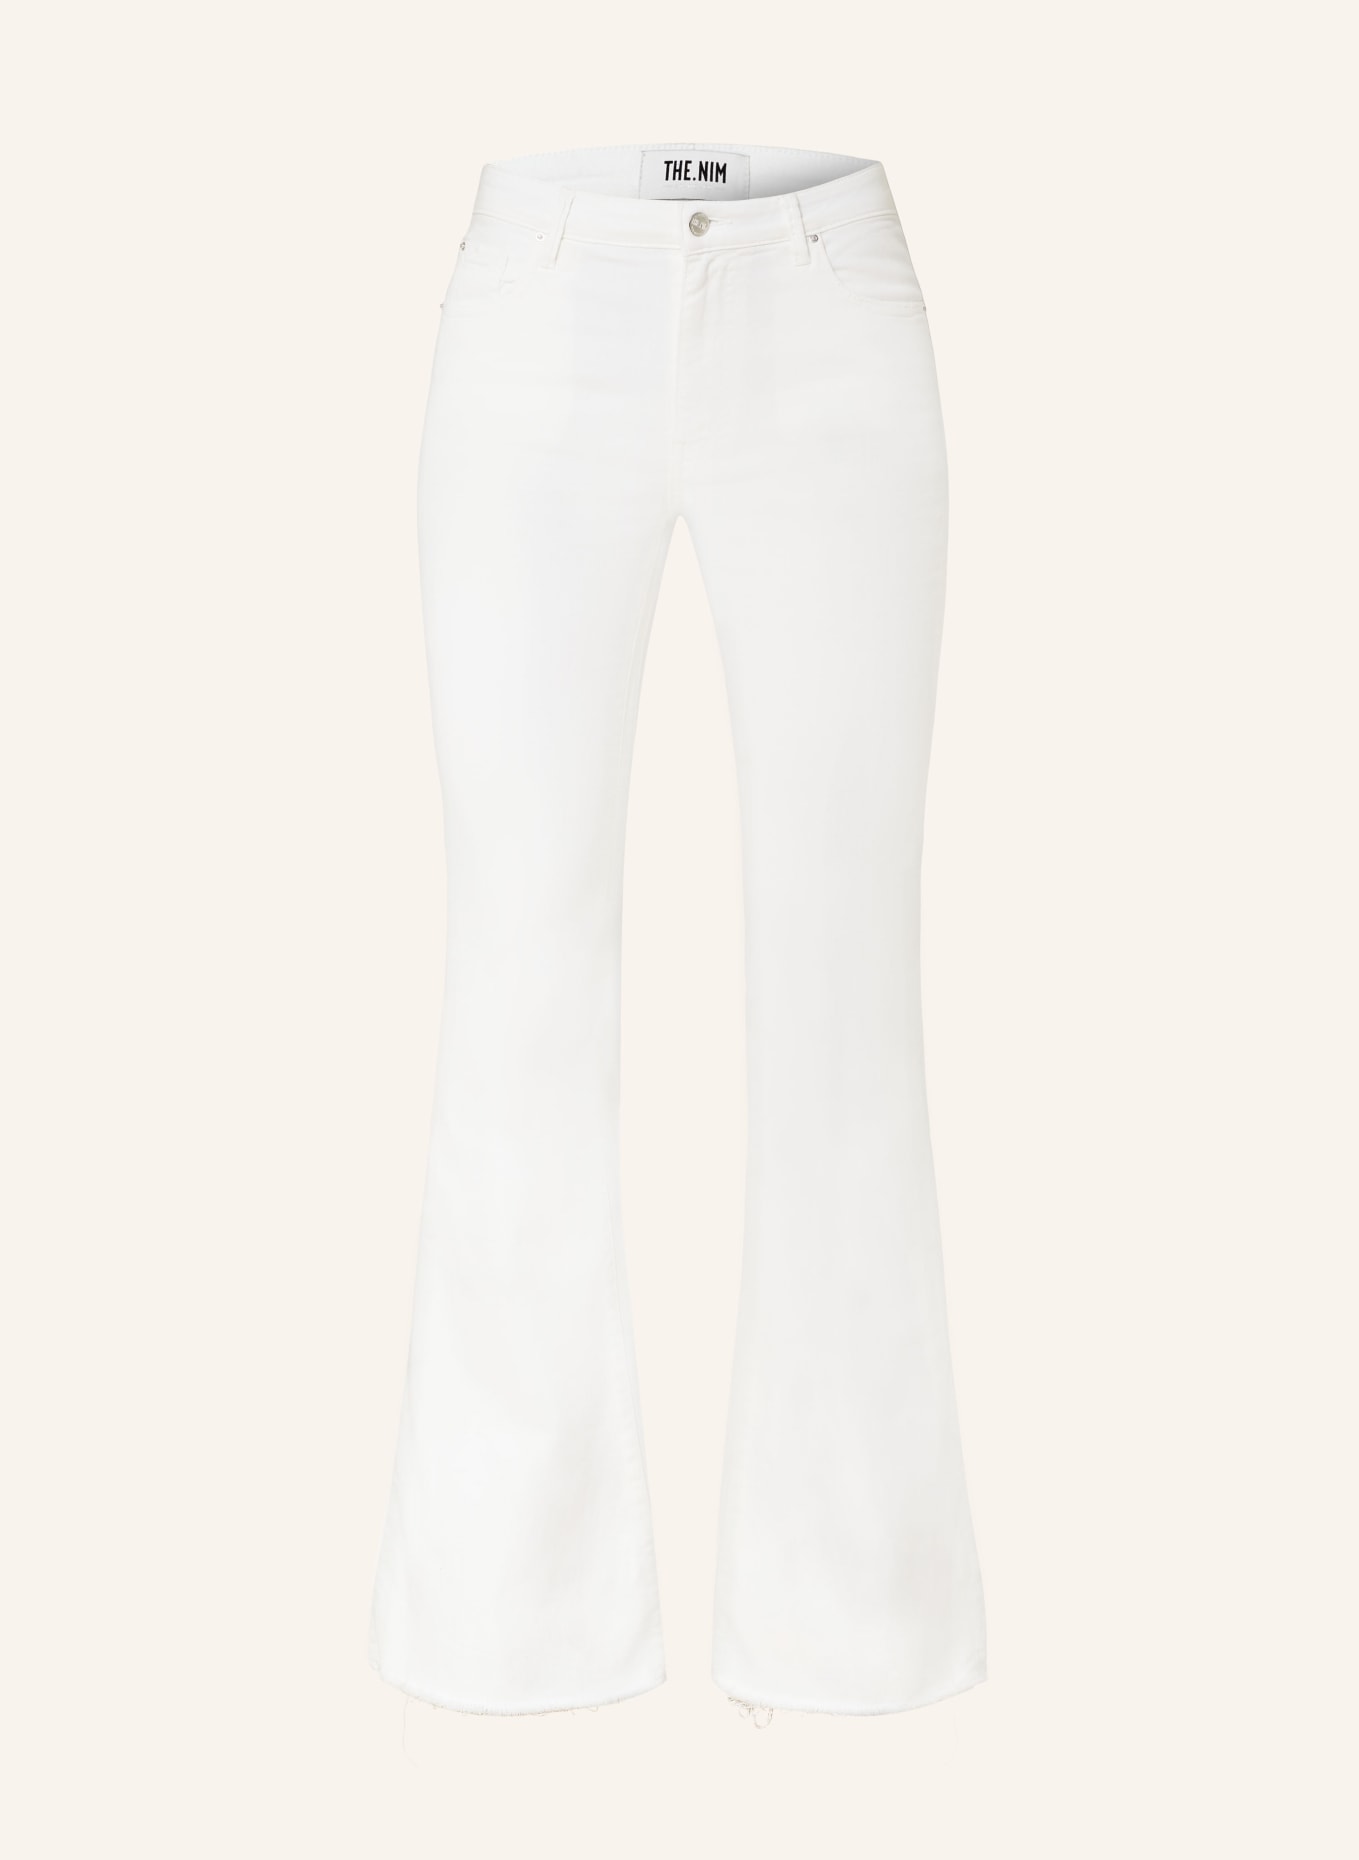 THE.NIM STANDARD Flared jeans KYLIE, Color: C001-WHT WHITE (Image 1)